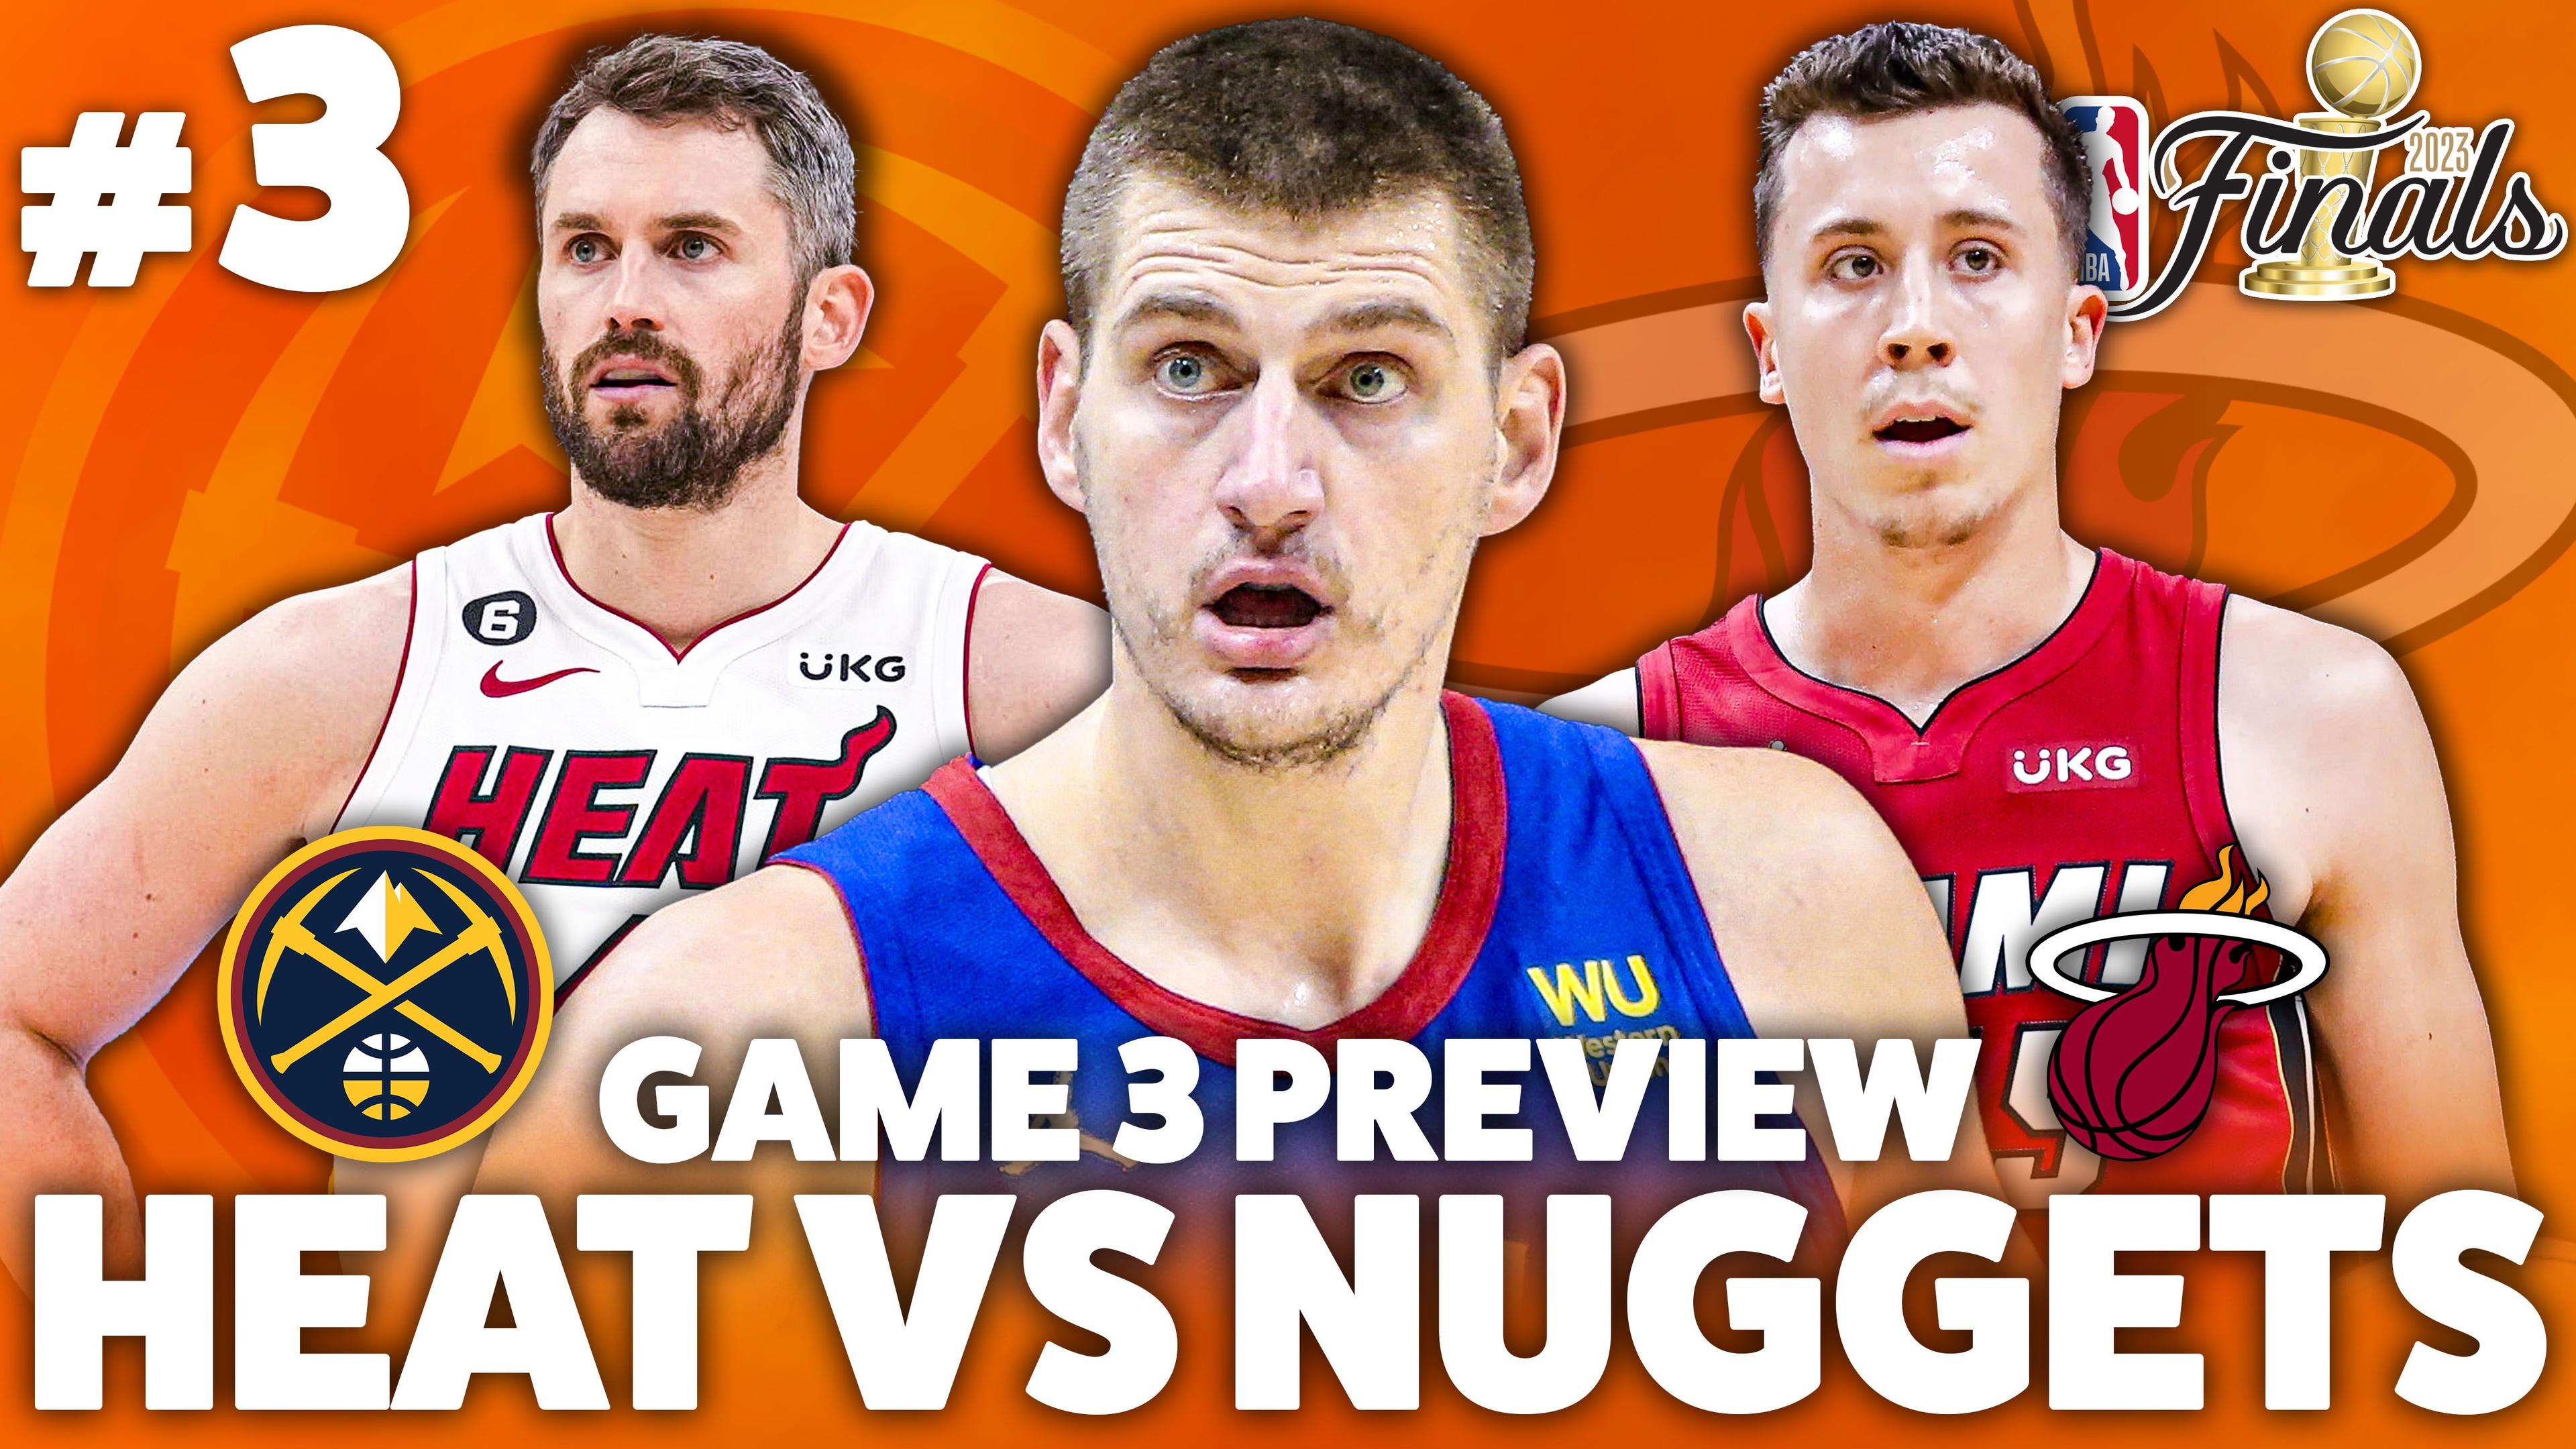 Heat vs Nuggets game 3 preview.jpg